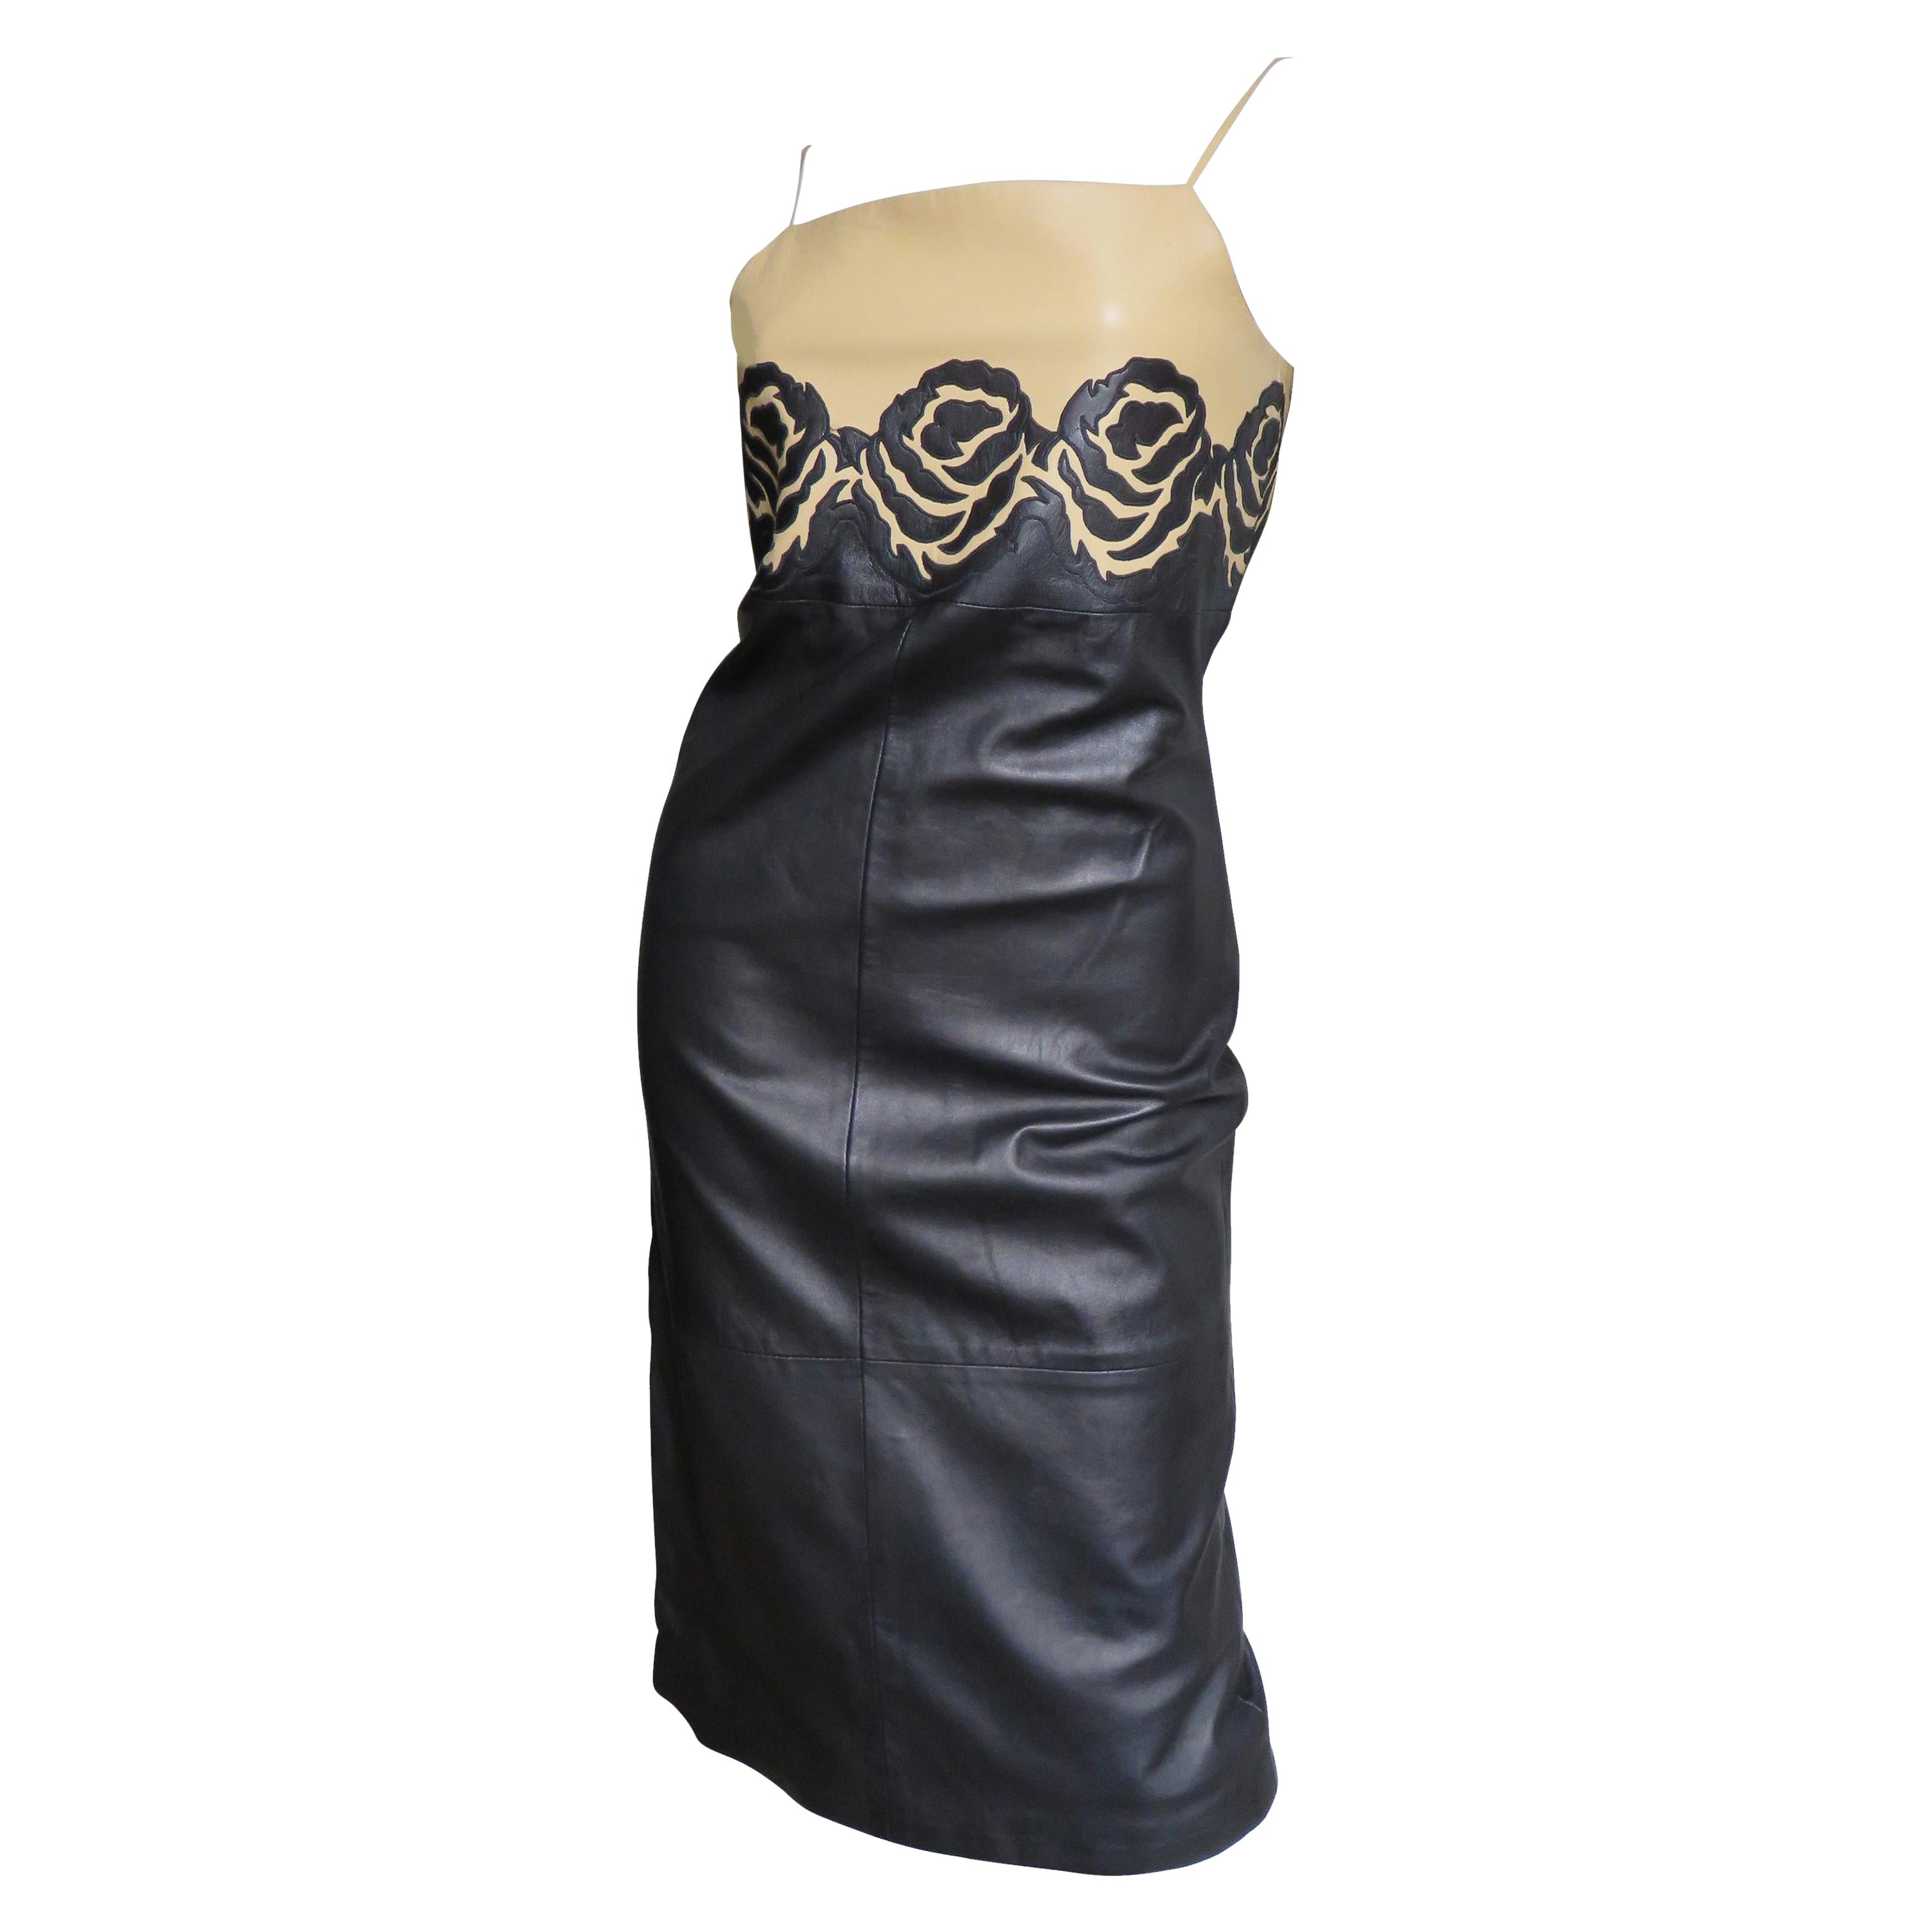  Gianni Versace Leather Color Block Dress with Applique Roses 1990s